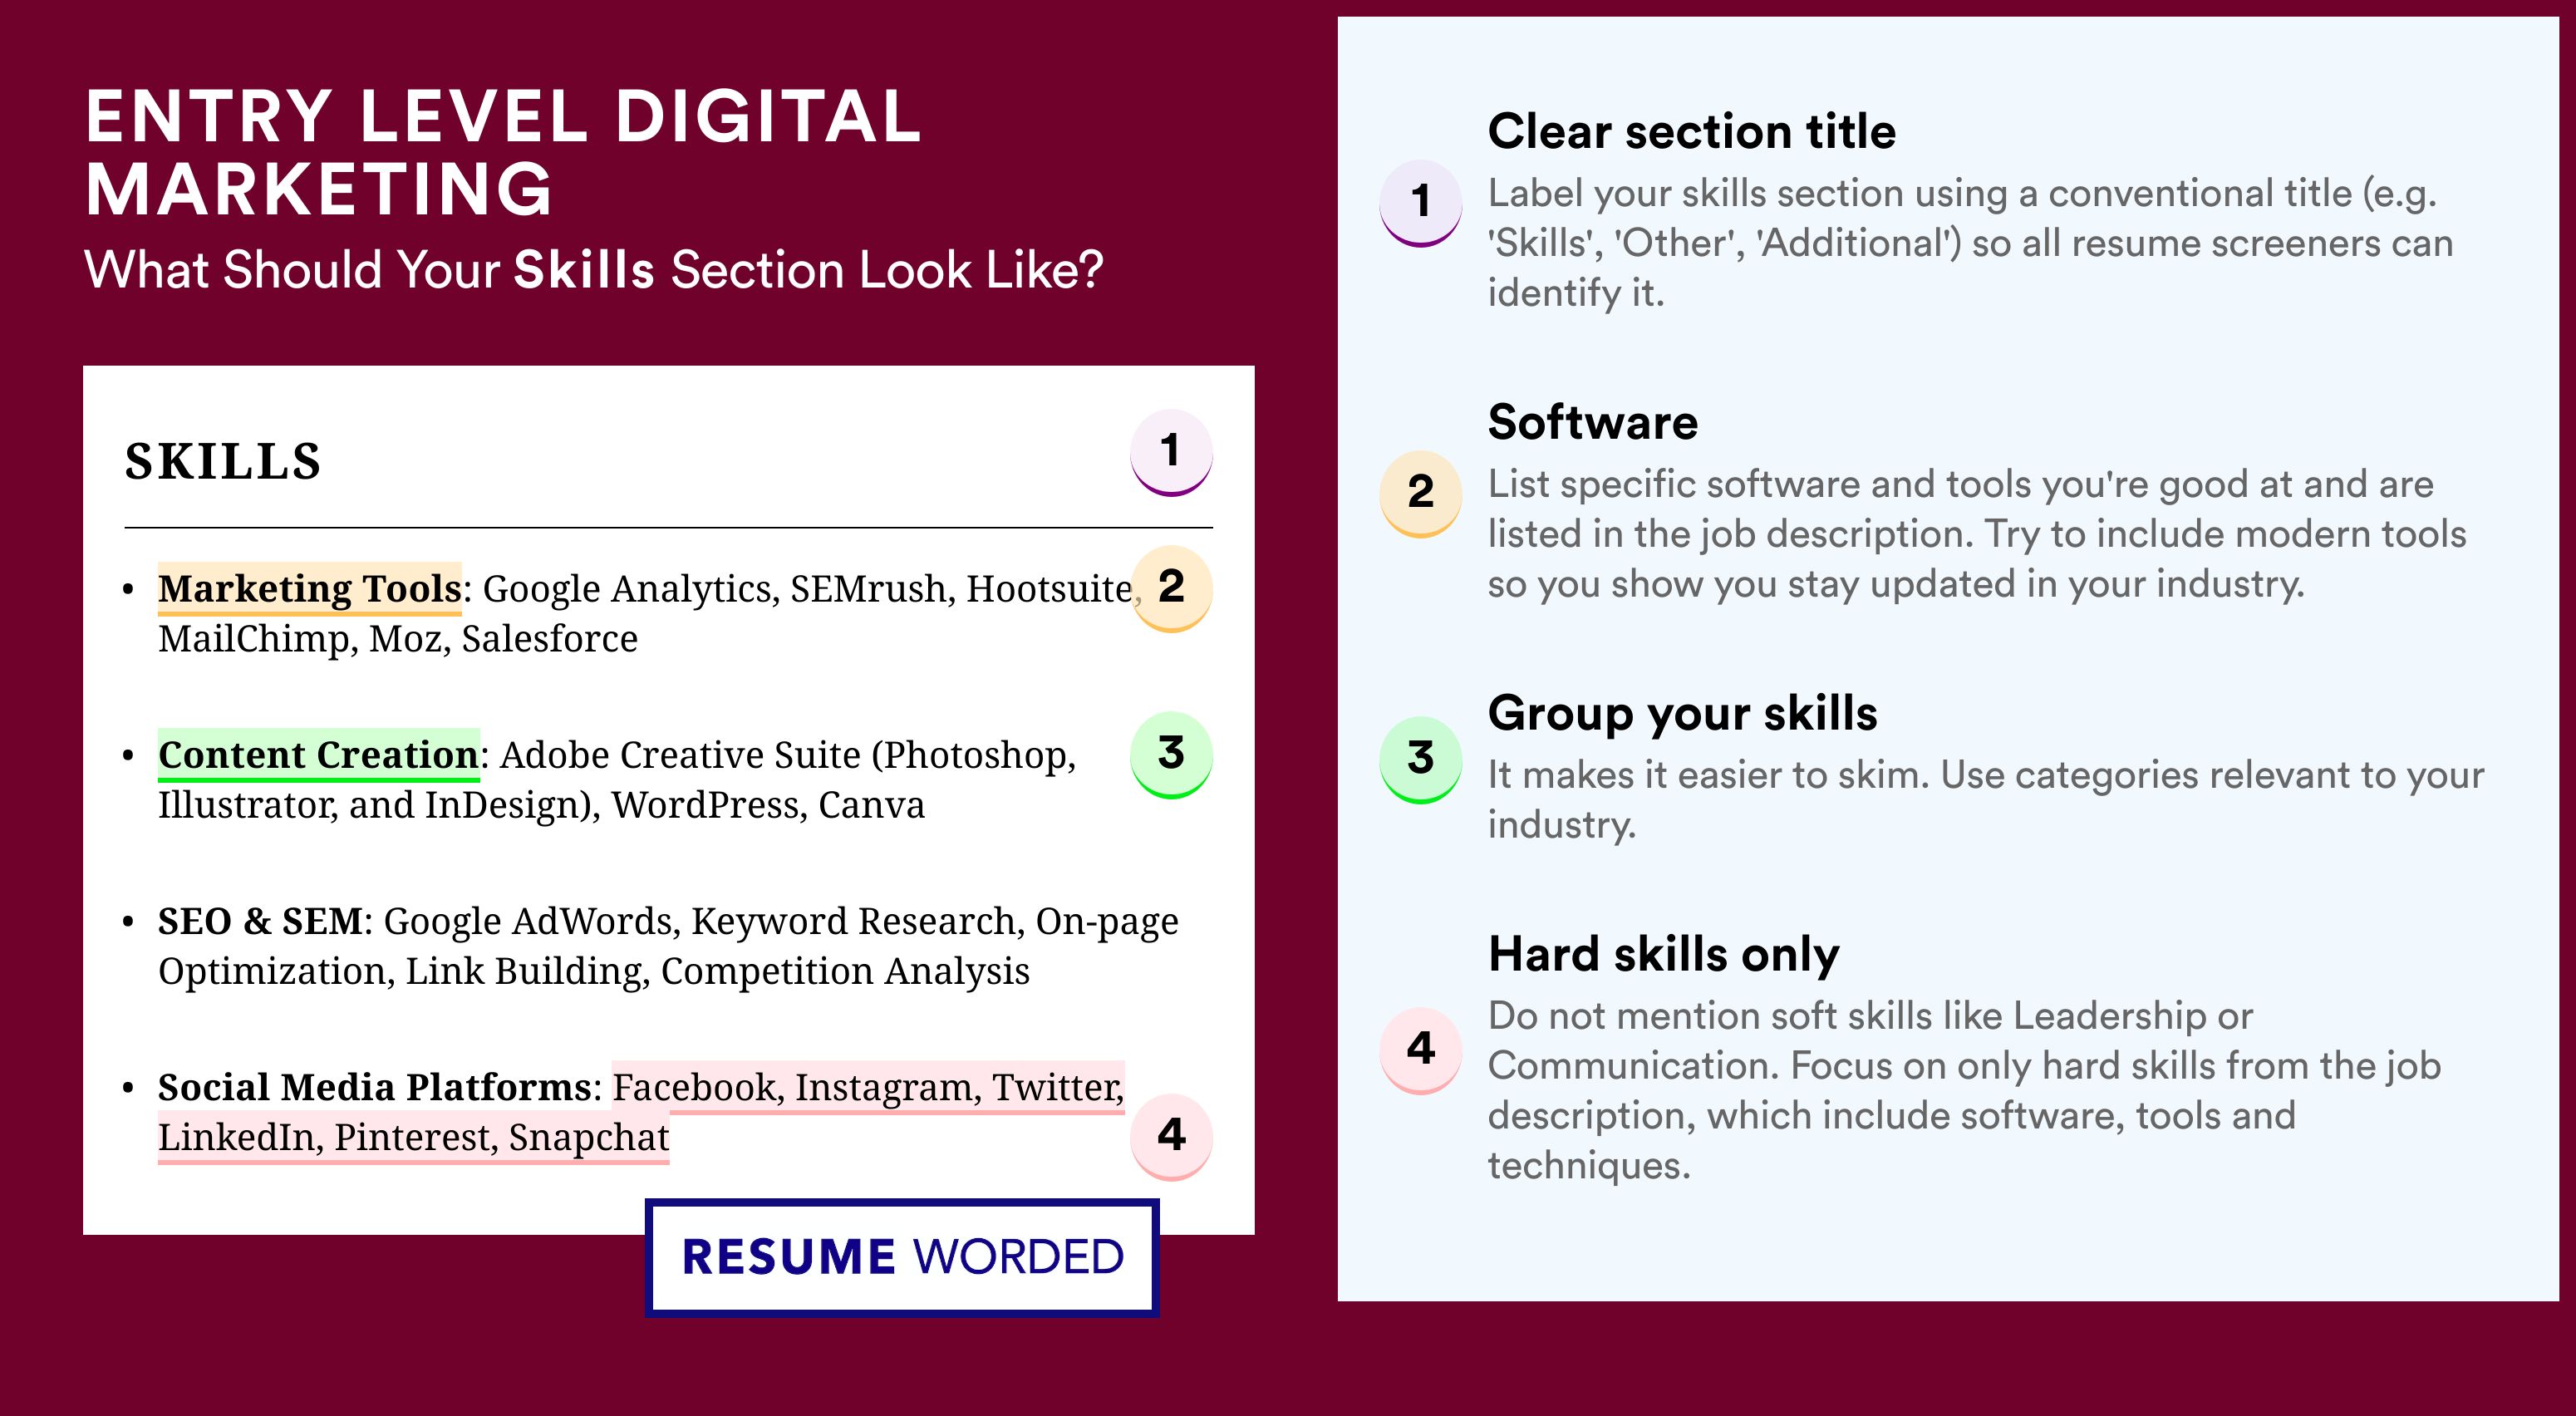 How To Write Your Skills Section - Entry Level Digital Marketing Roles